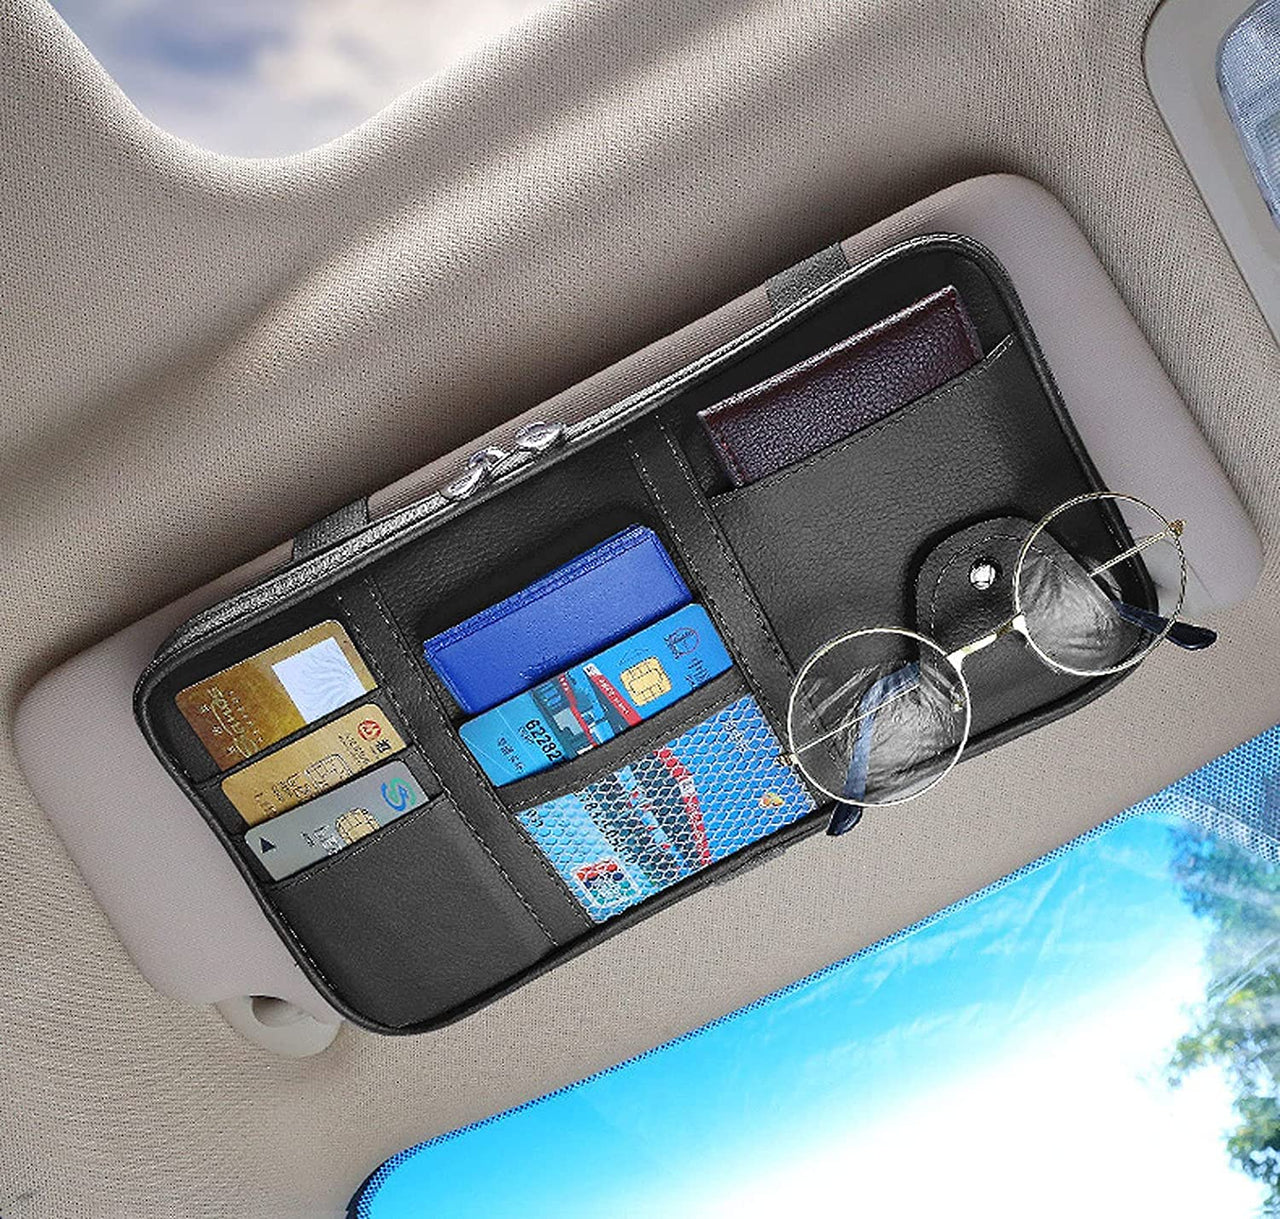 Car Sun Visor Organier Truck SUV Sun Visor Storage Pocket PU Leather Pouch Holder with Multi-Pocket Double Zipper Net Pocket, for Cards Pens Sunglasses Document Newest, Universal Fit for All Cars, Car Accessories